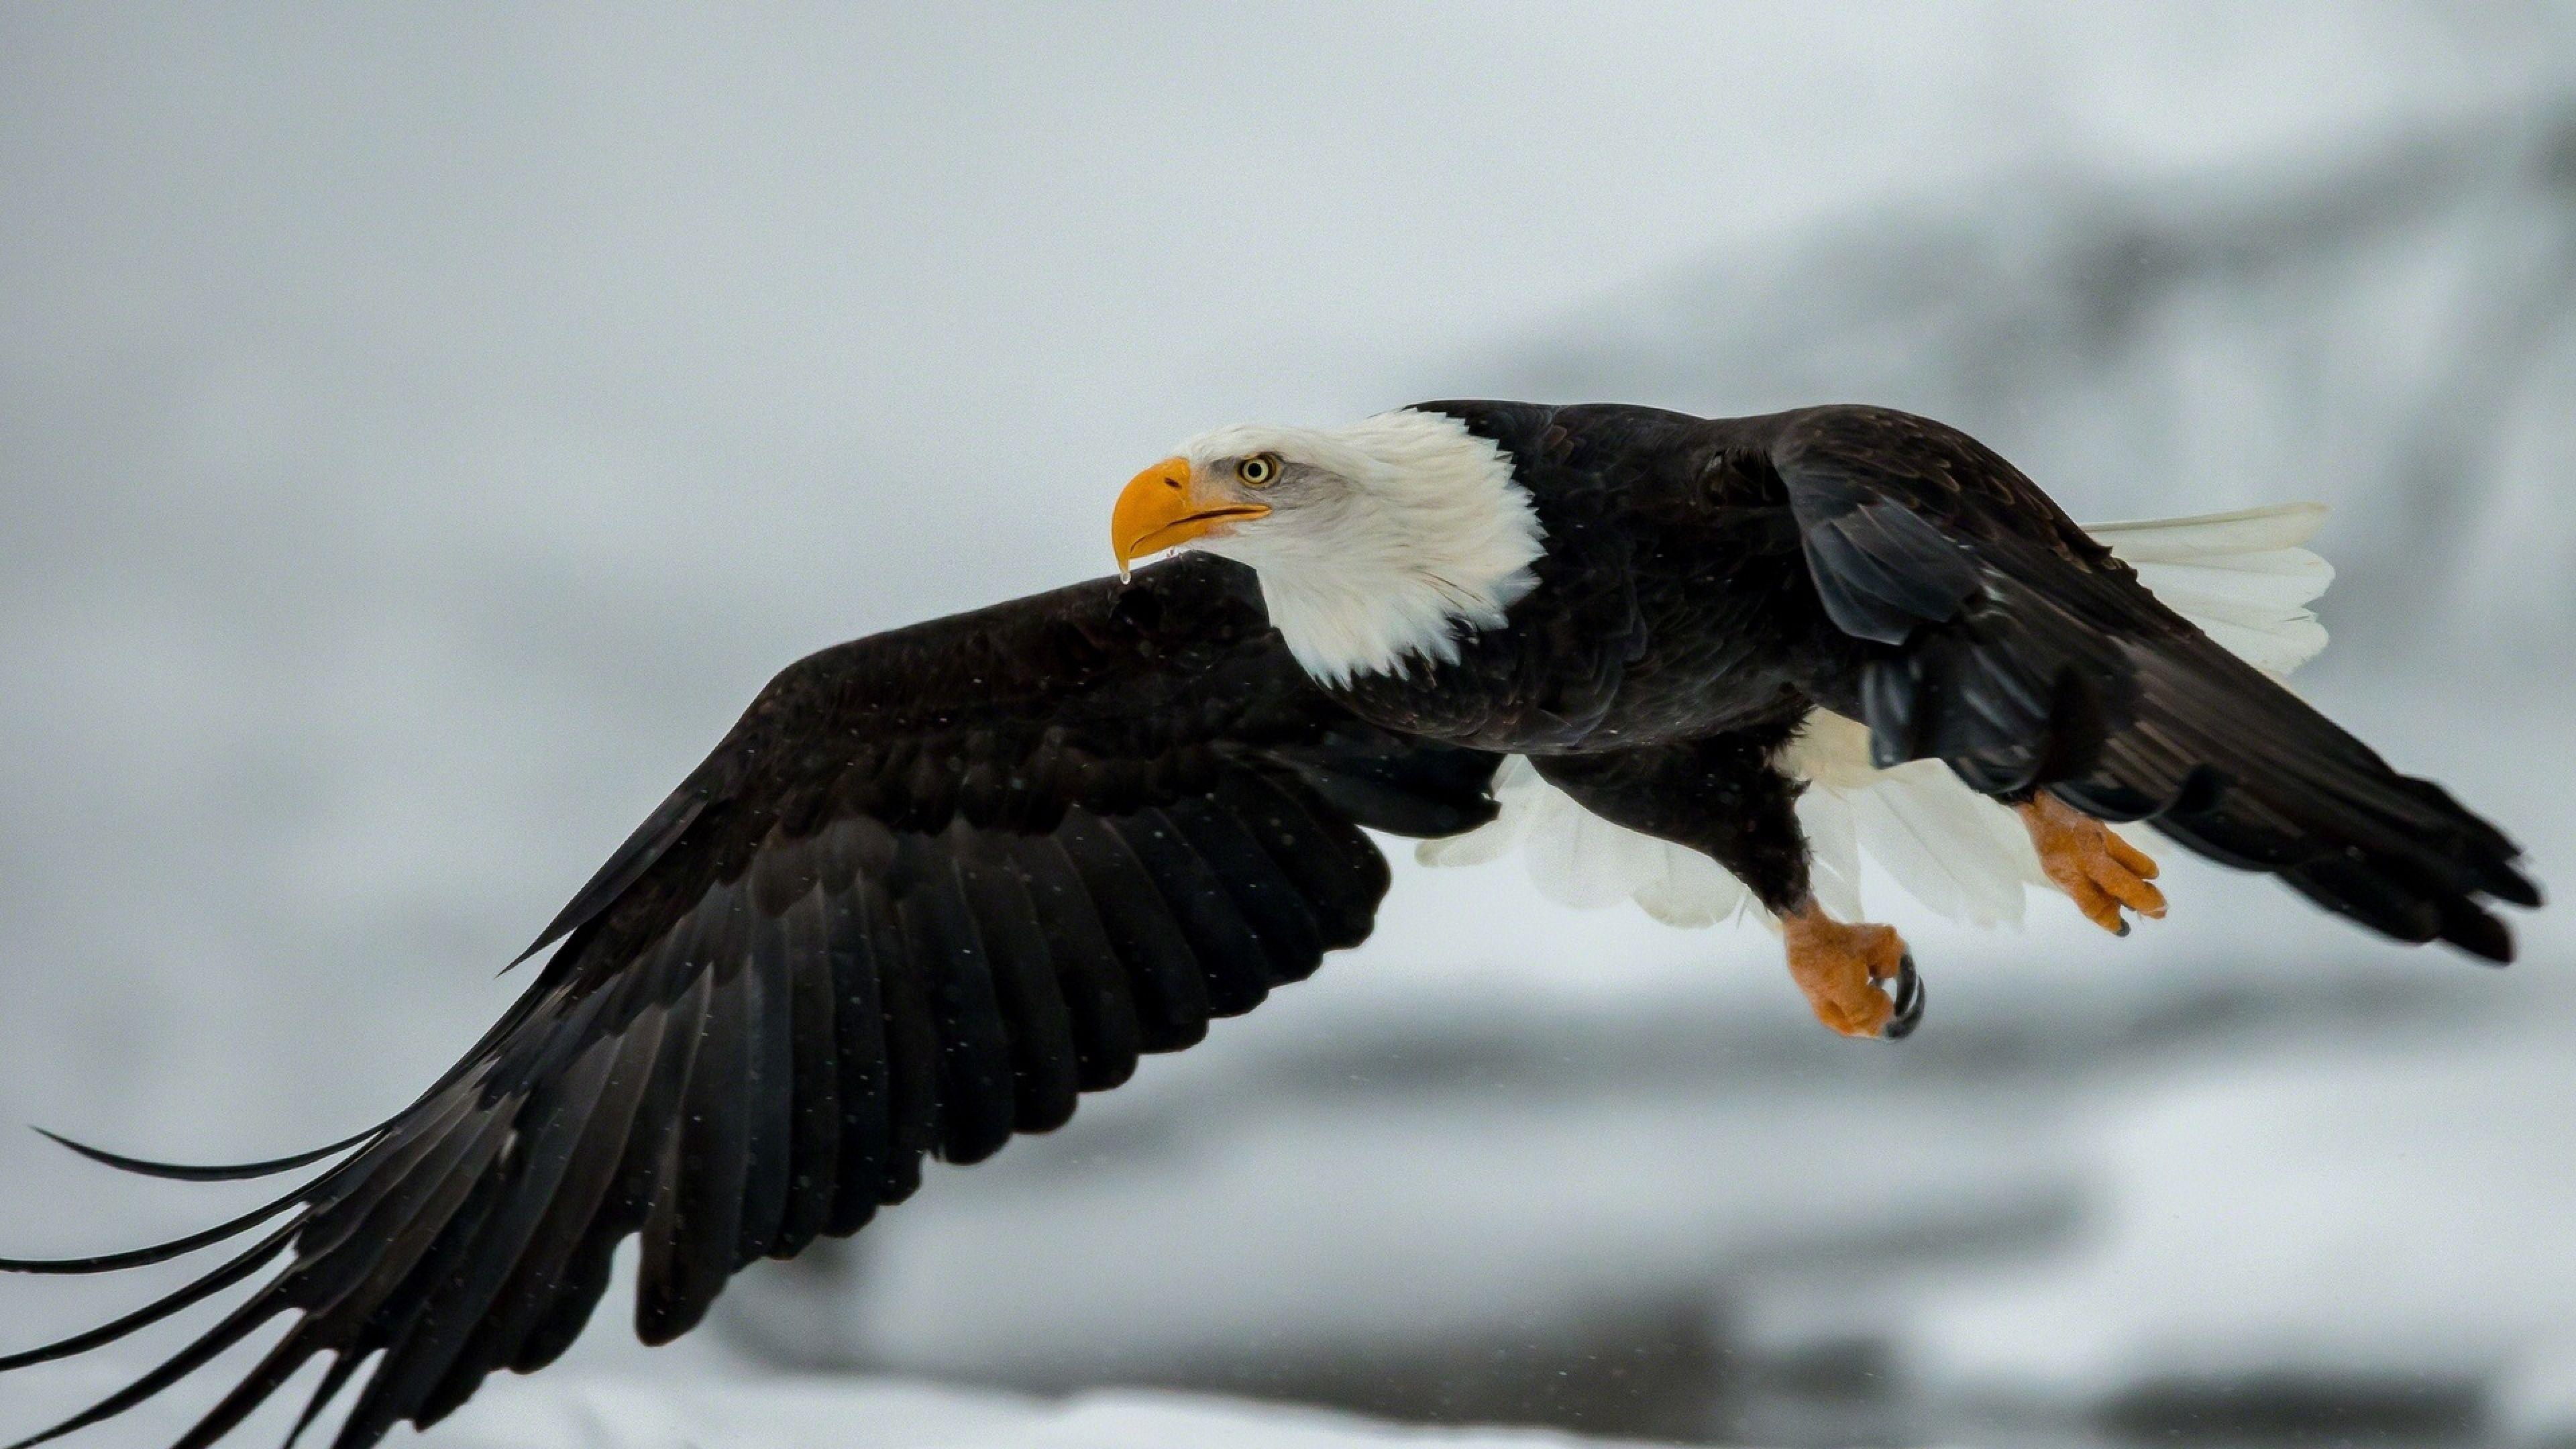 4K Eagle Wallpapers - Top Free 4K Eagle Backgrounds - WallpaperAccess